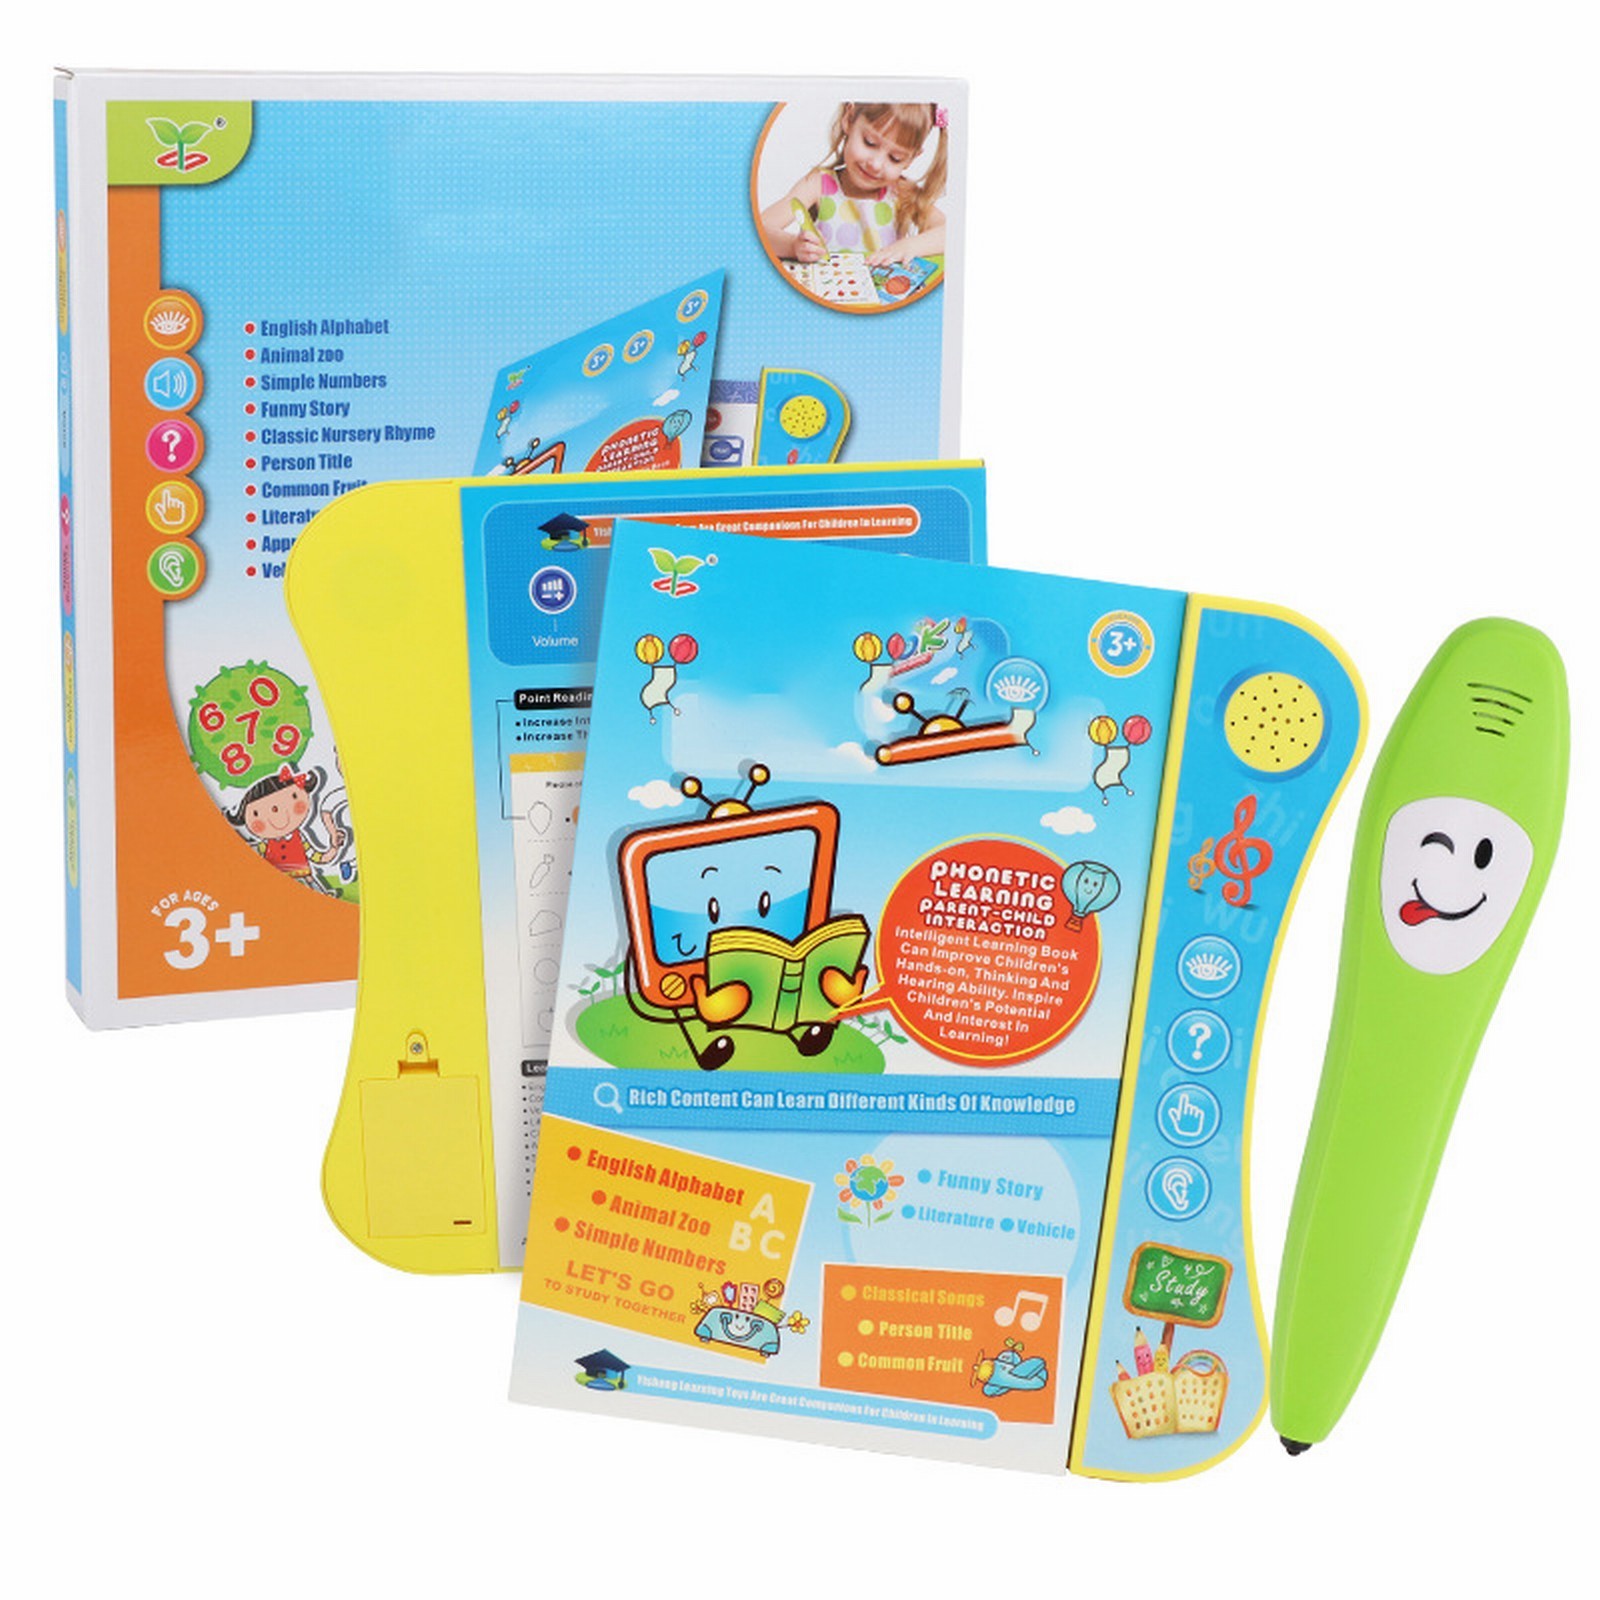 ZiSUGP ABC Sound Book For Children English Letters & Words Learning ...